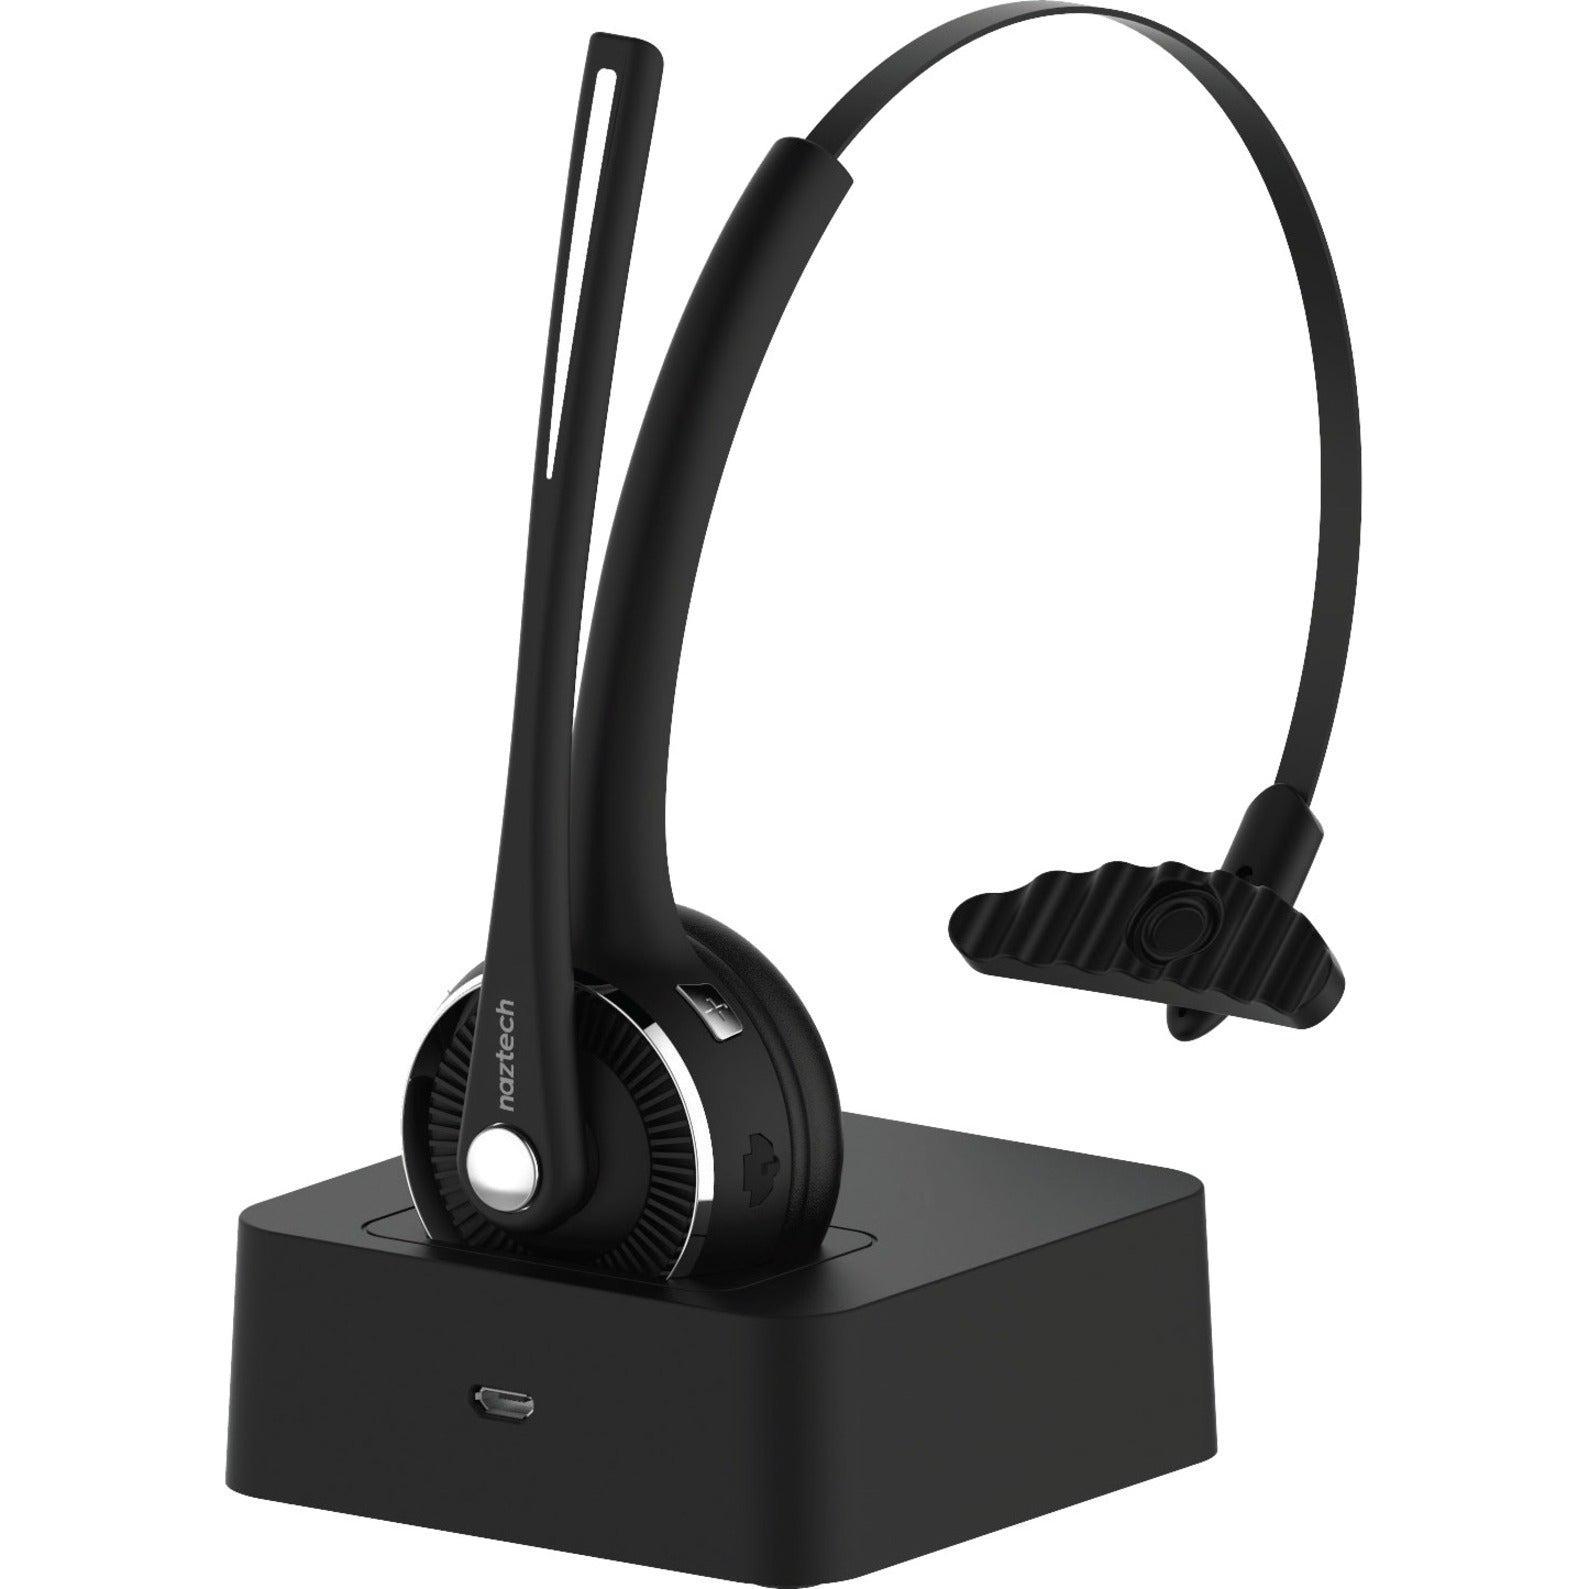 Naztech 15183 N980 BT Wireless Headset with Base - Black, Stereo Sound, Noise Cancelling Microphone, 2 Year Warranty